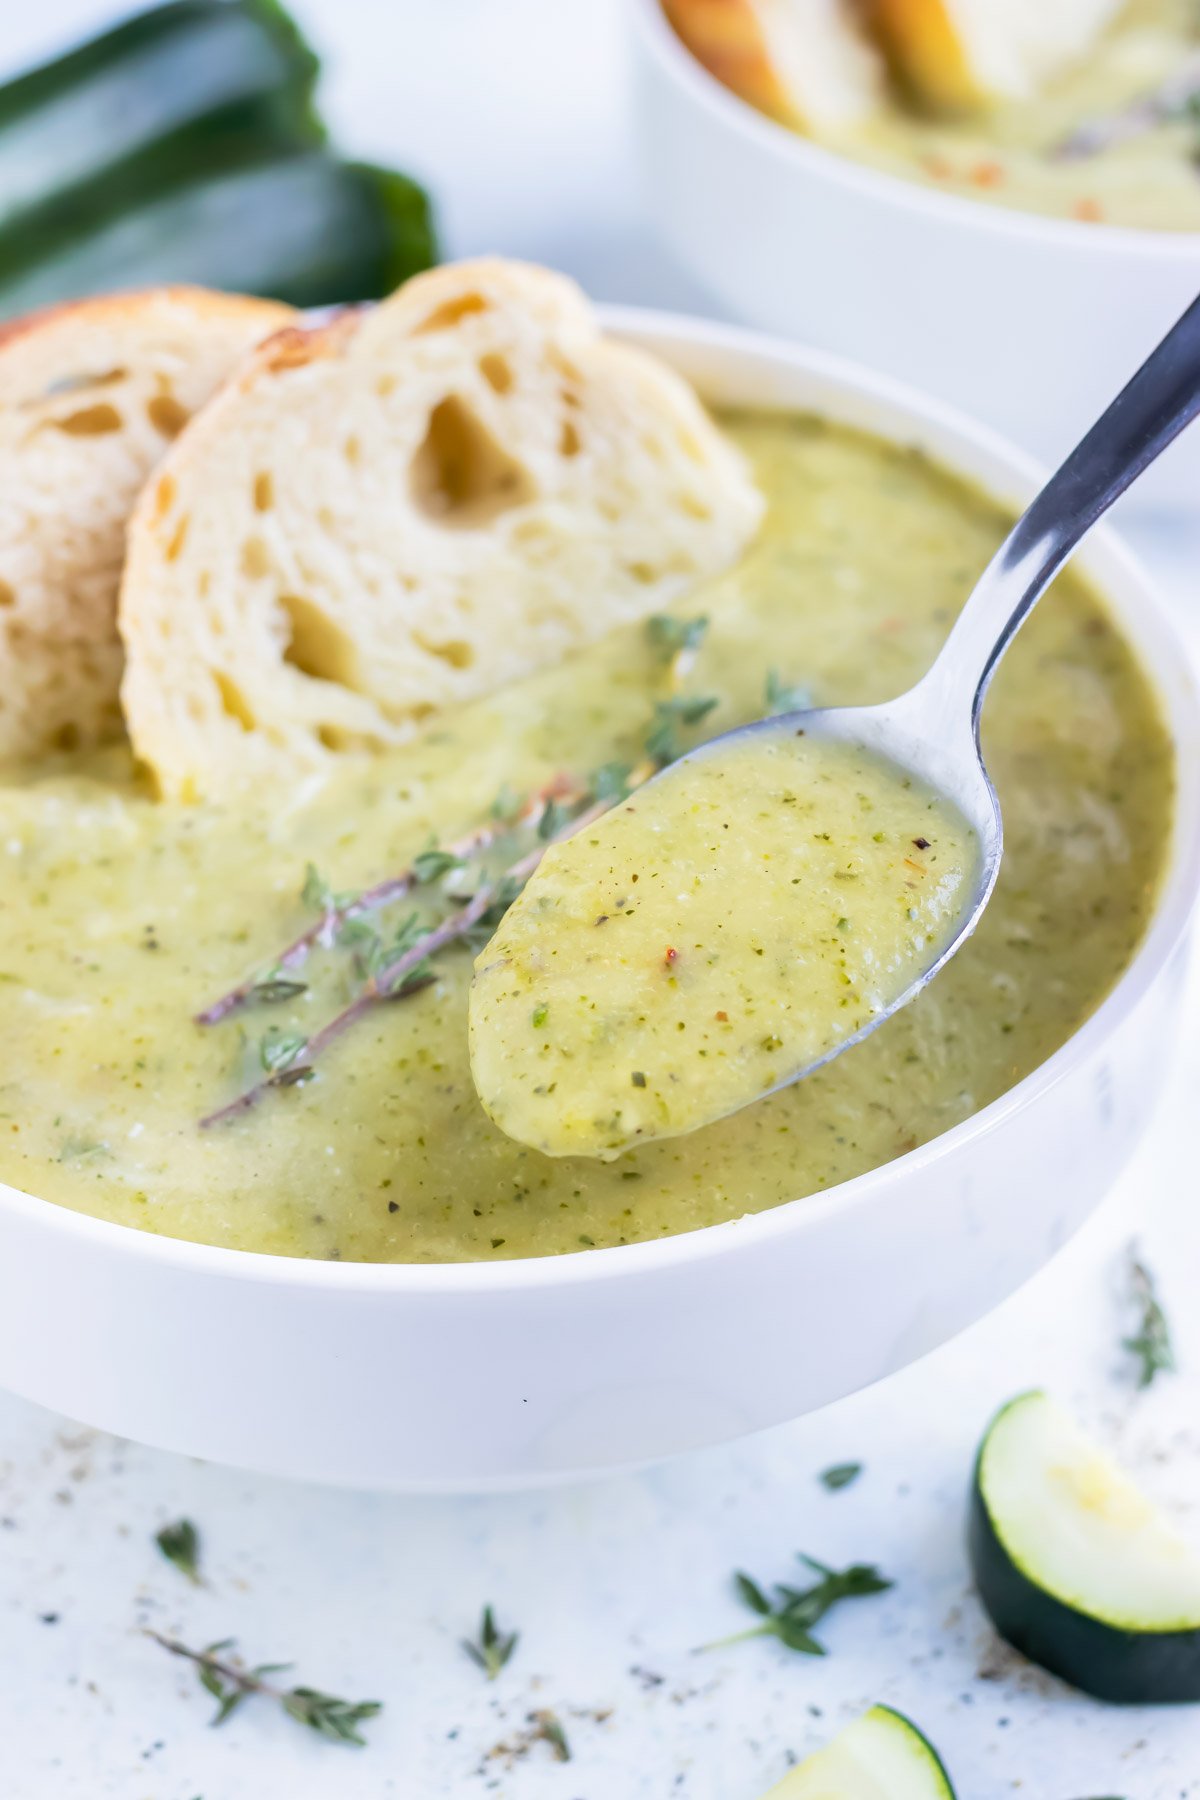 A metal spoon lifts homemade zucchini soup from a bowl.